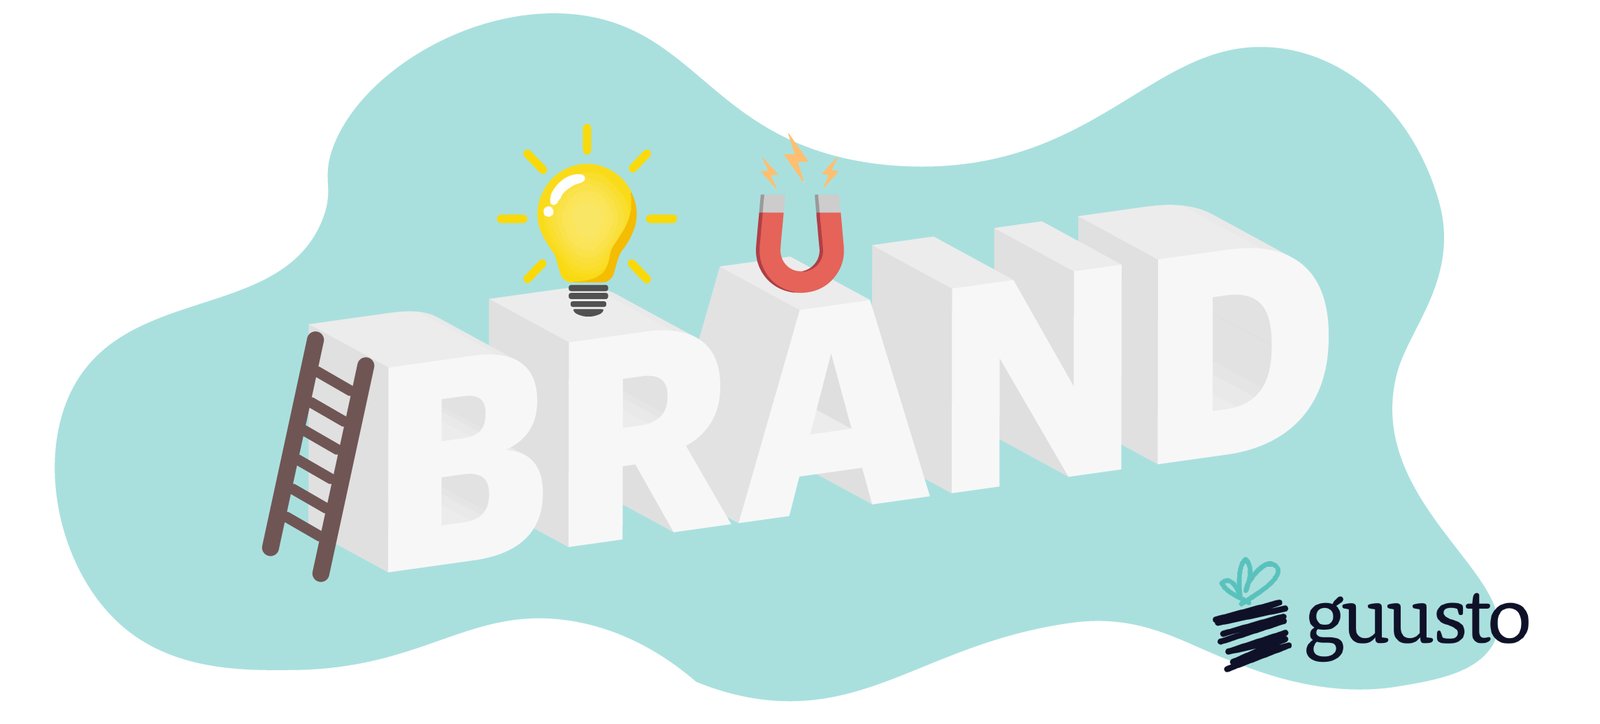 5 Ways to Build a Better Employer Brand